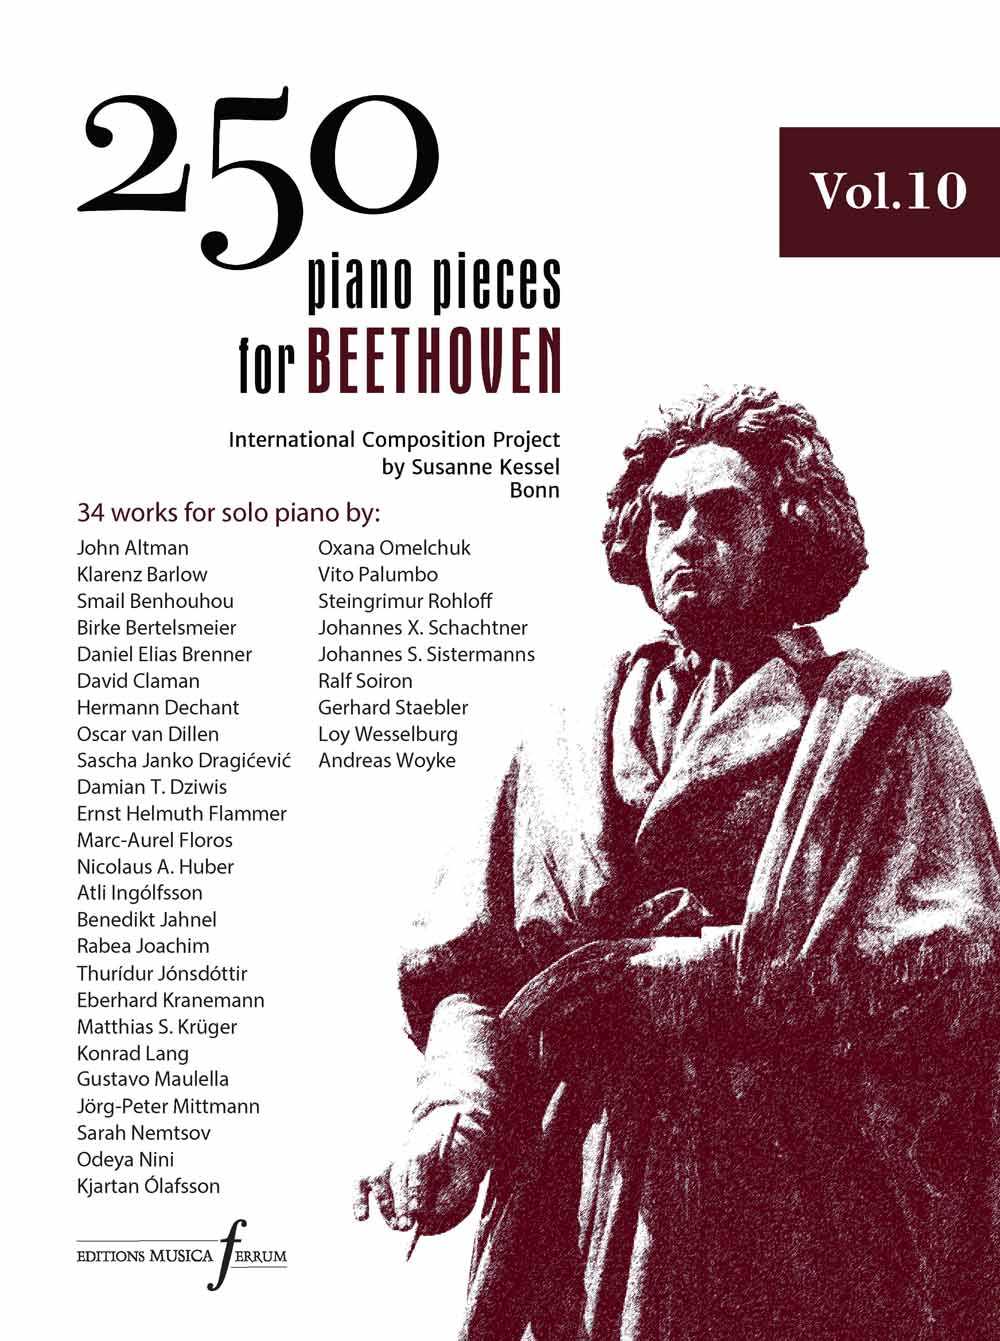 250 Piano Pieces For Beethoven - Vol. 10 